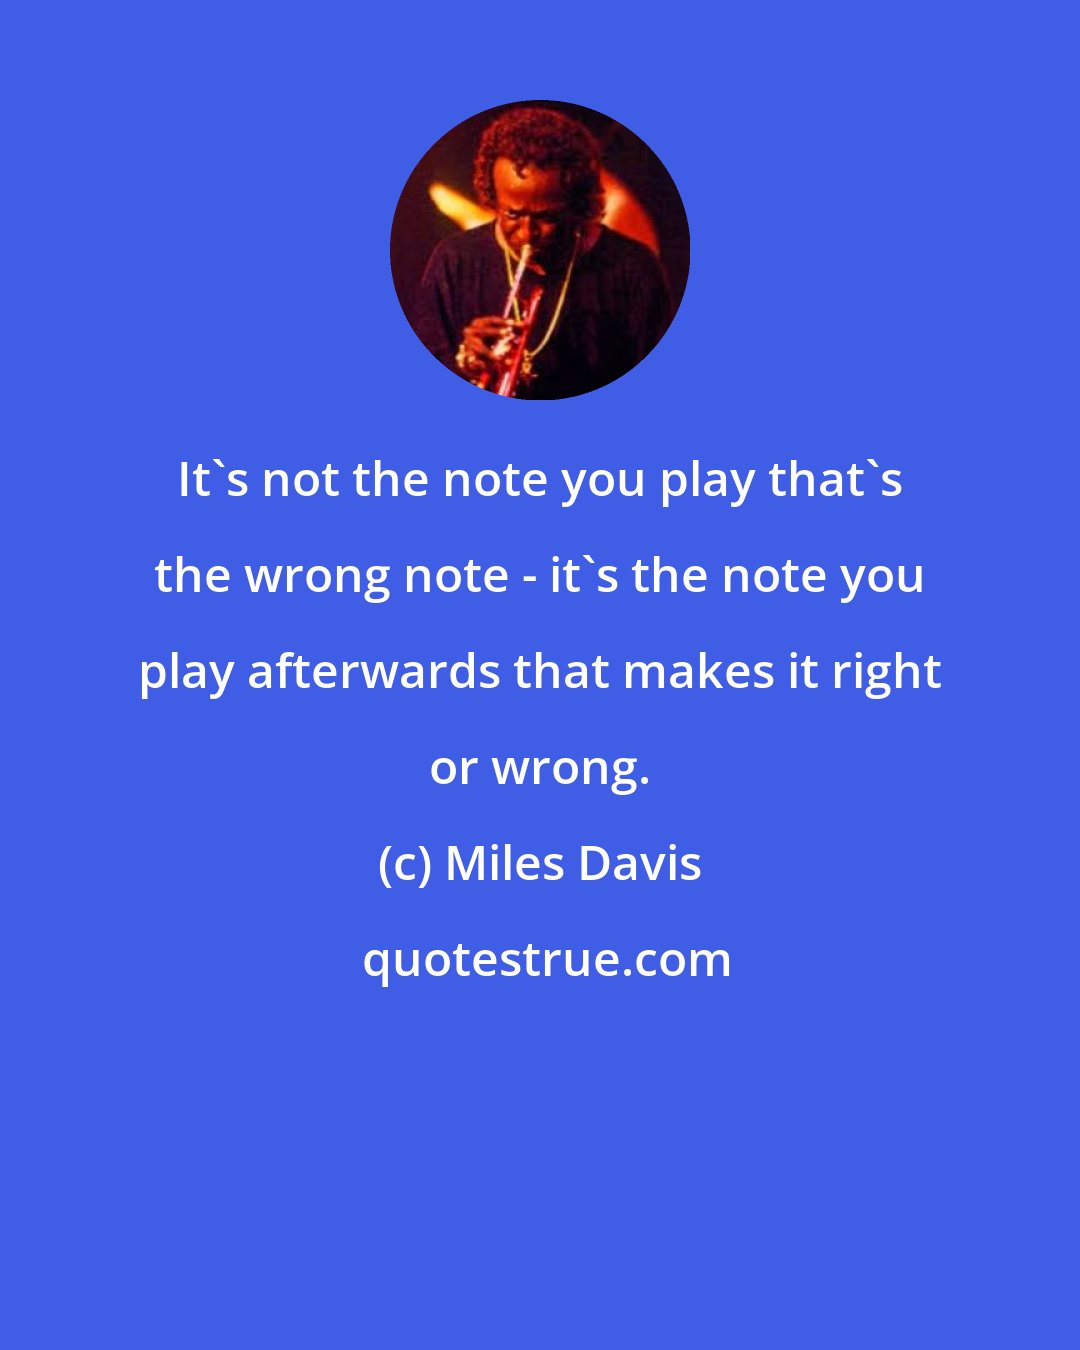 Miles Davis: It's not the note you play that's the wrong note - it's the note you play afterwards that makes it right or wrong.